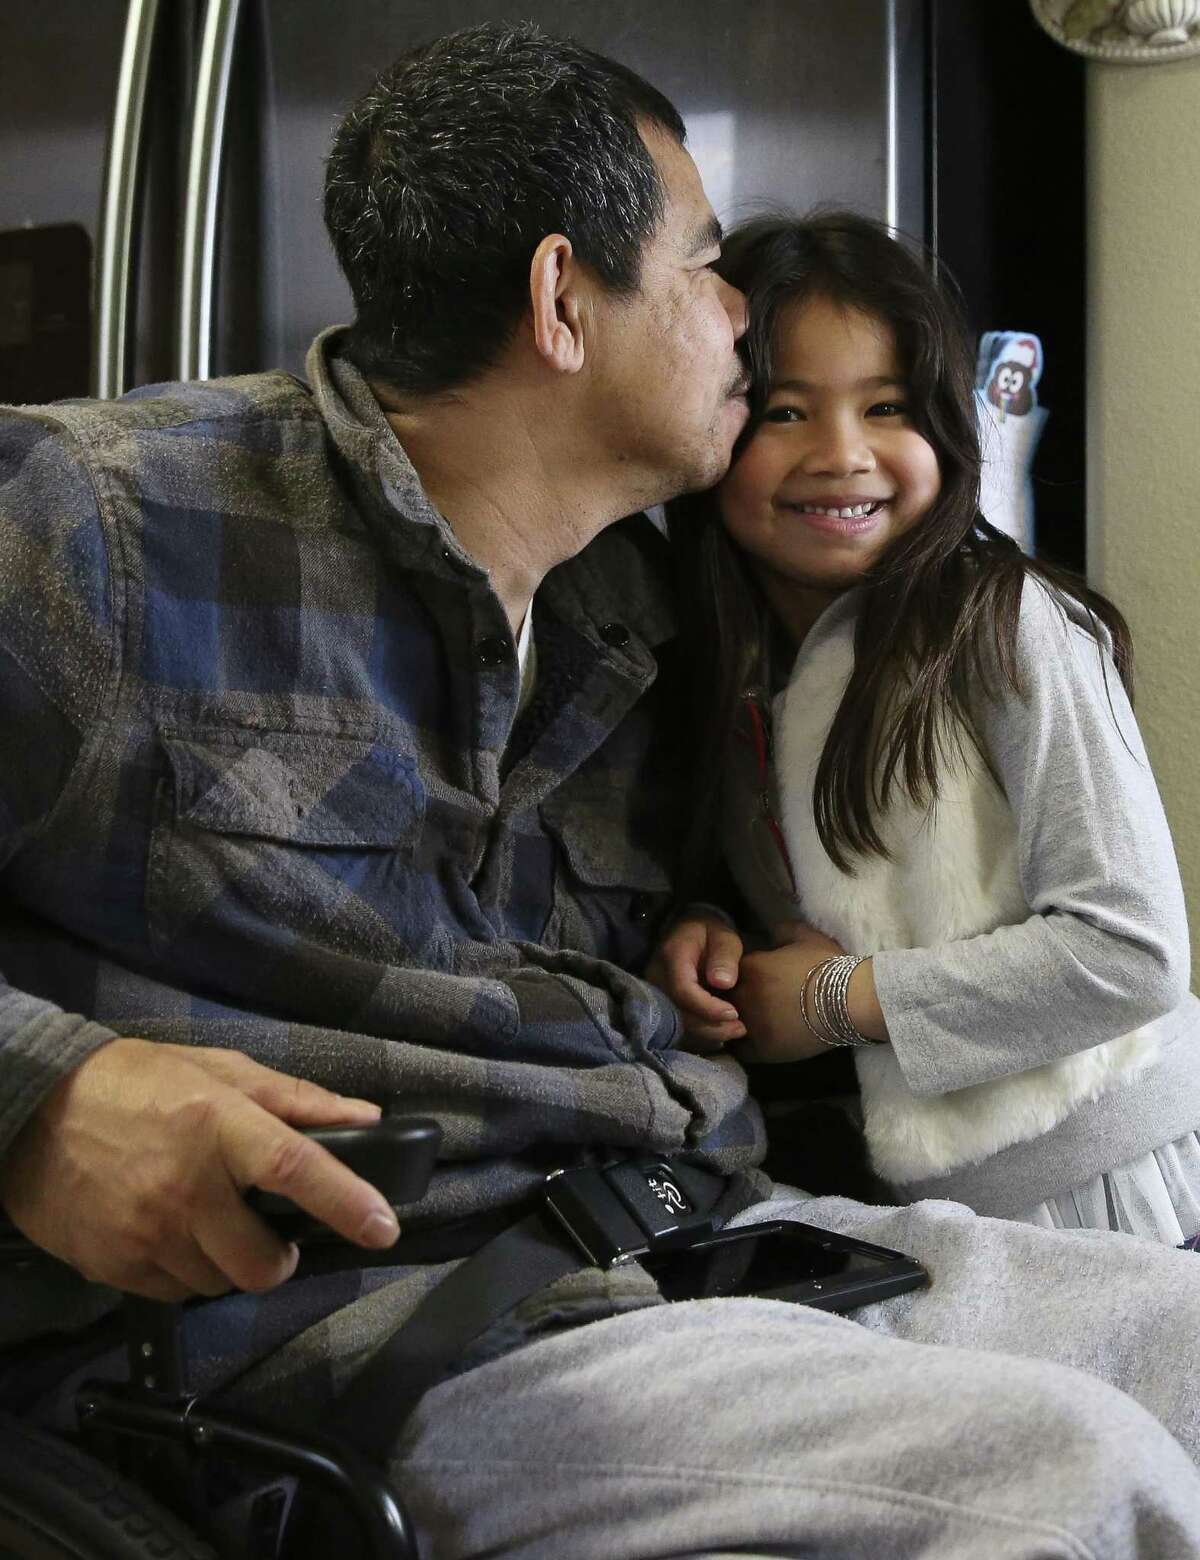 Khanh Hung Le, 47, kisses his daughter, Tonya, 7, when she comes home after school. Le has raised his daughter since she was 7 months old after he separated from his ex-wife.